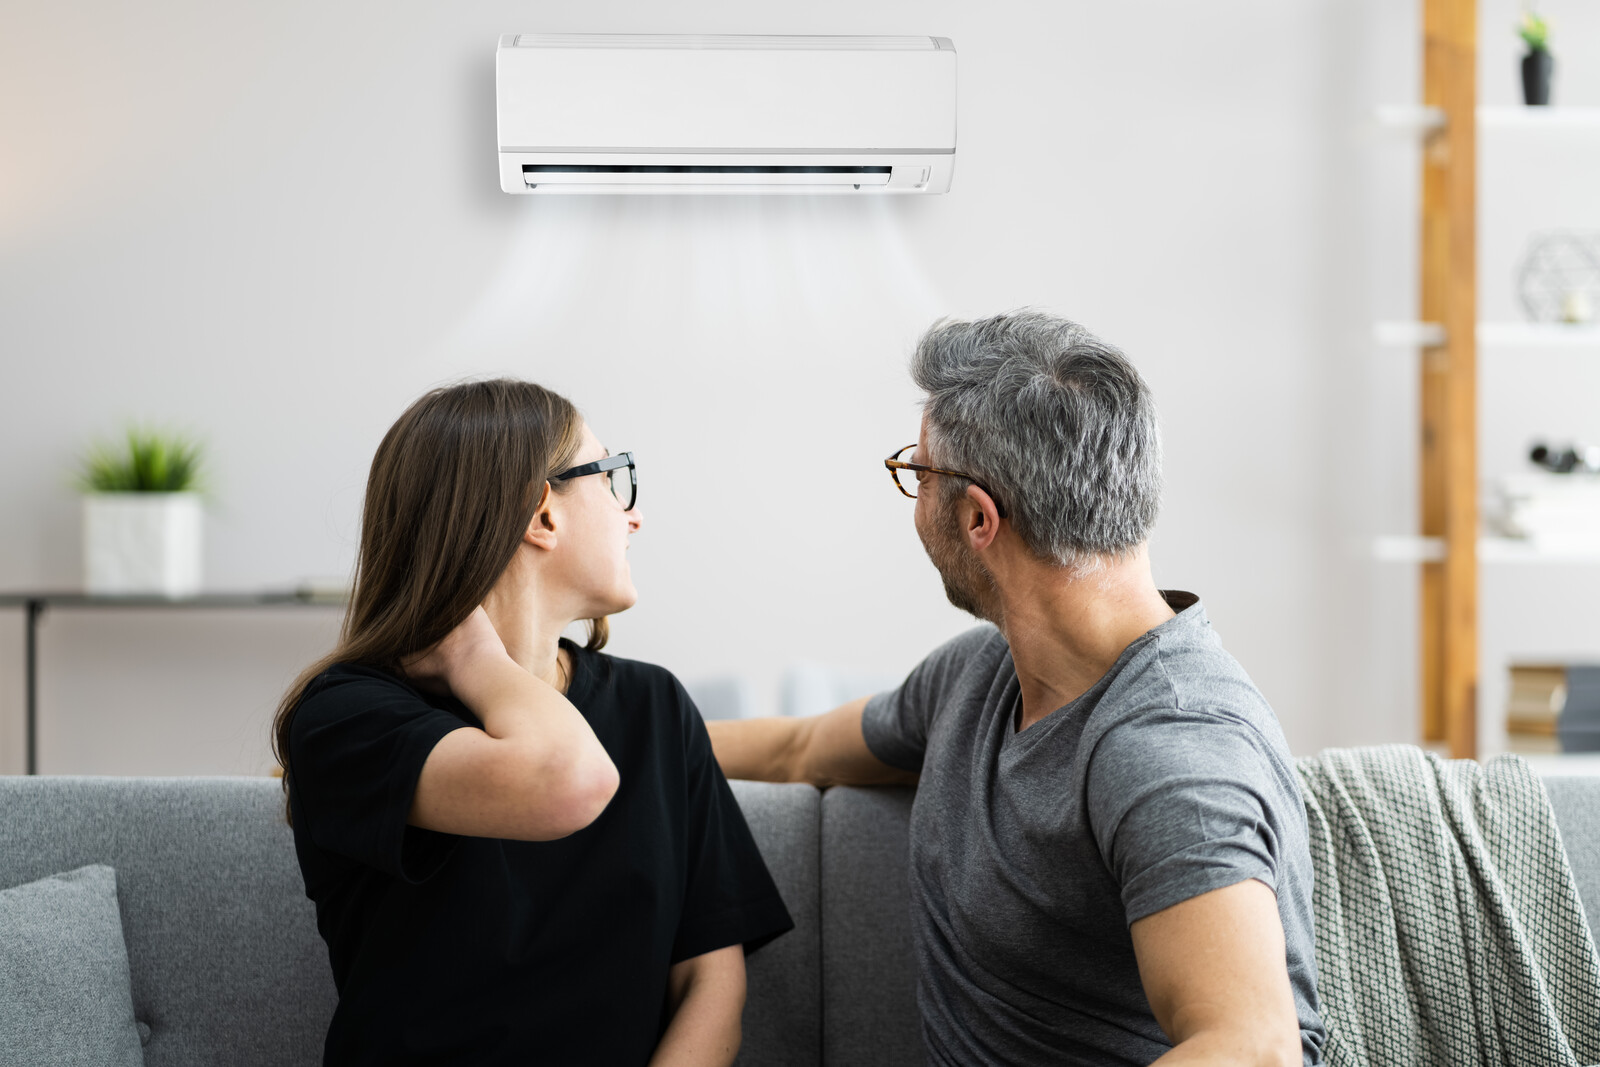 Why Choose a Ductless HVAC System for Your Home